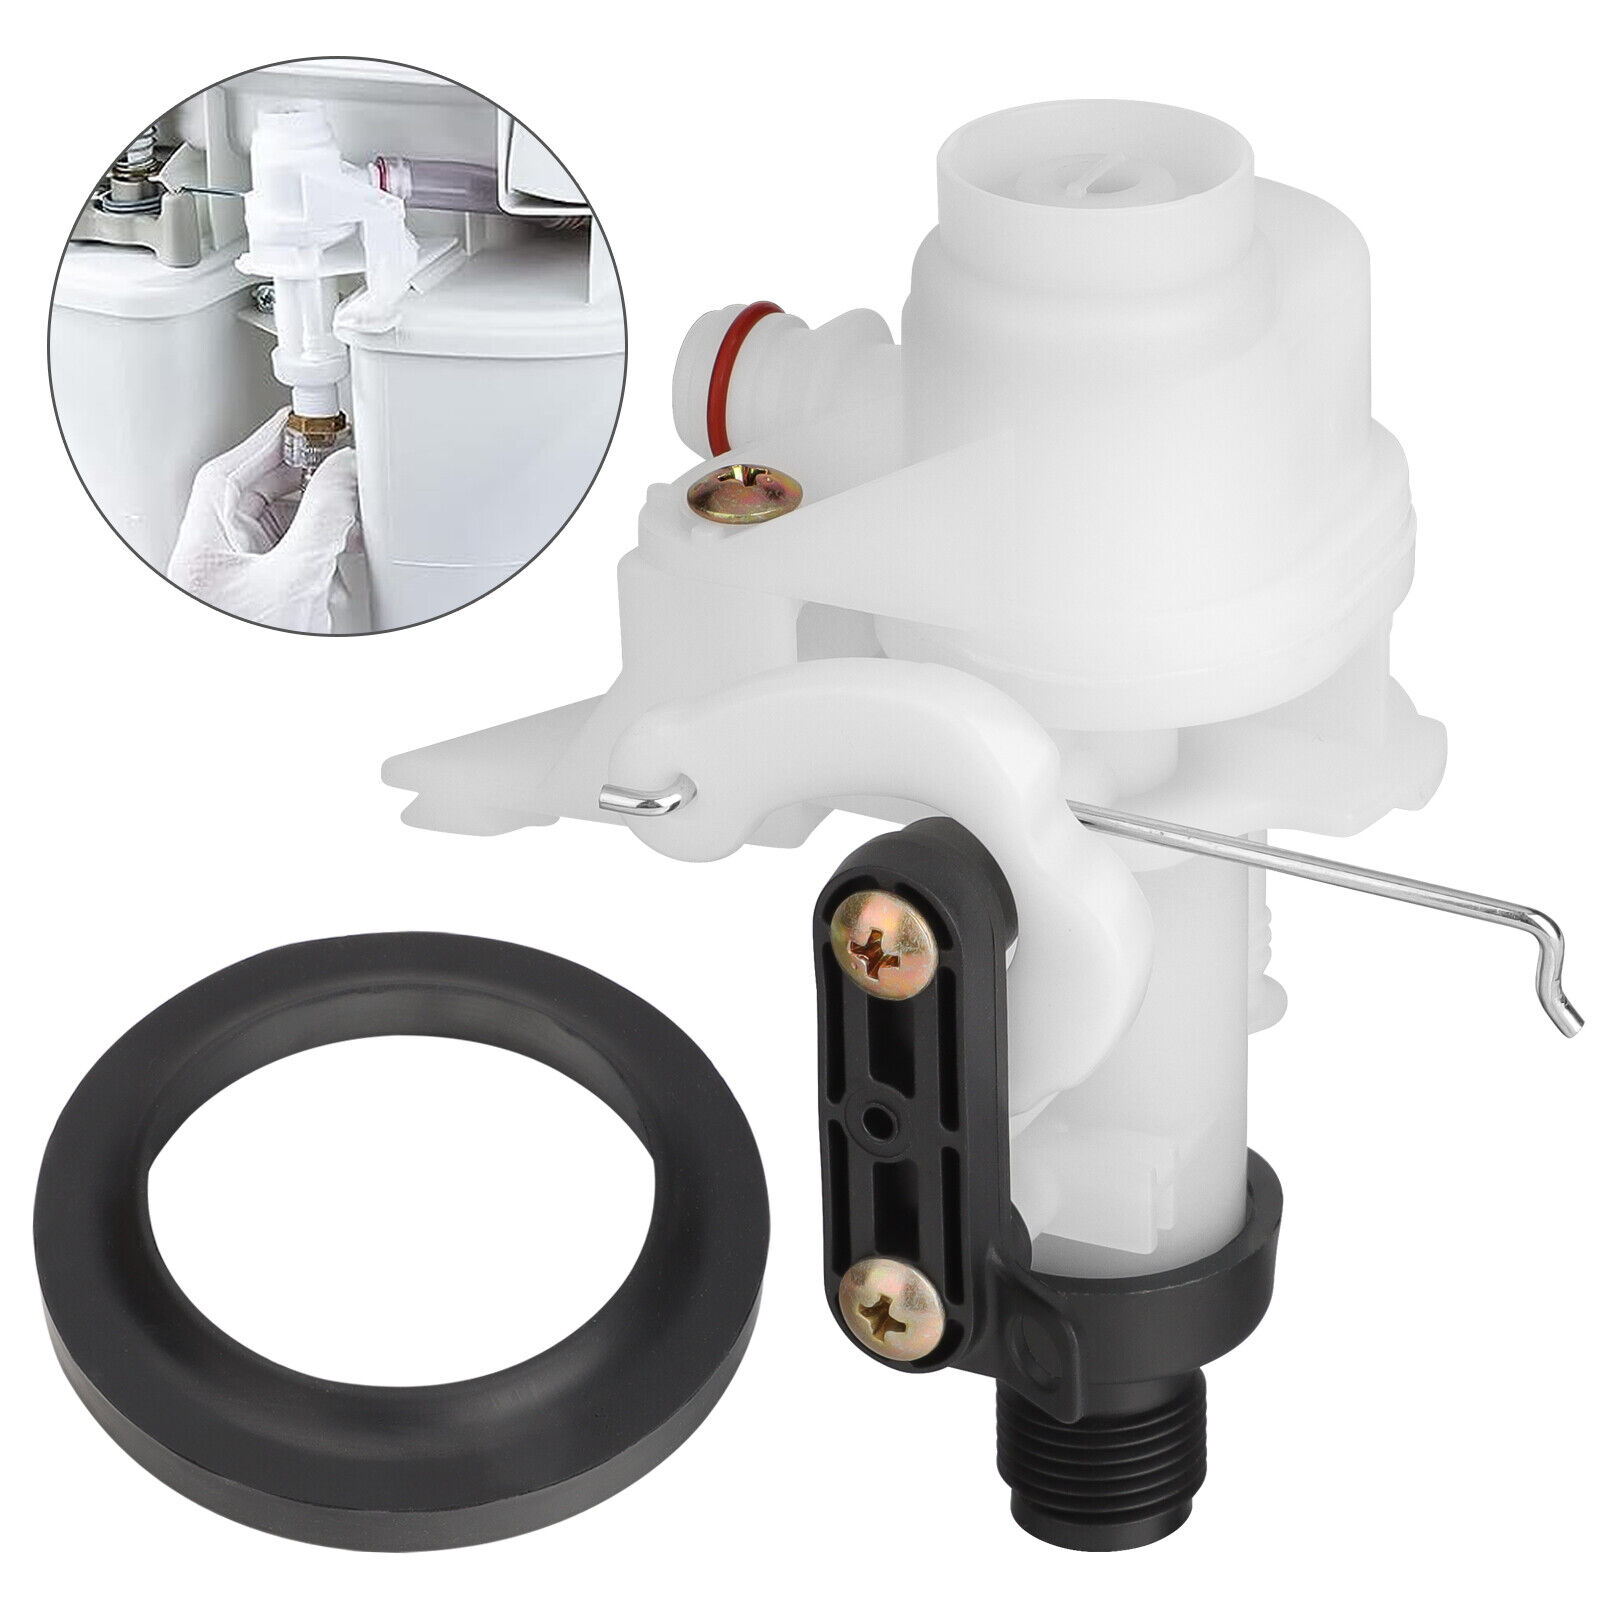 Upgraded Thetford Aqua Magic V Toilet Water Valve Replacement Part# 31705 For RV